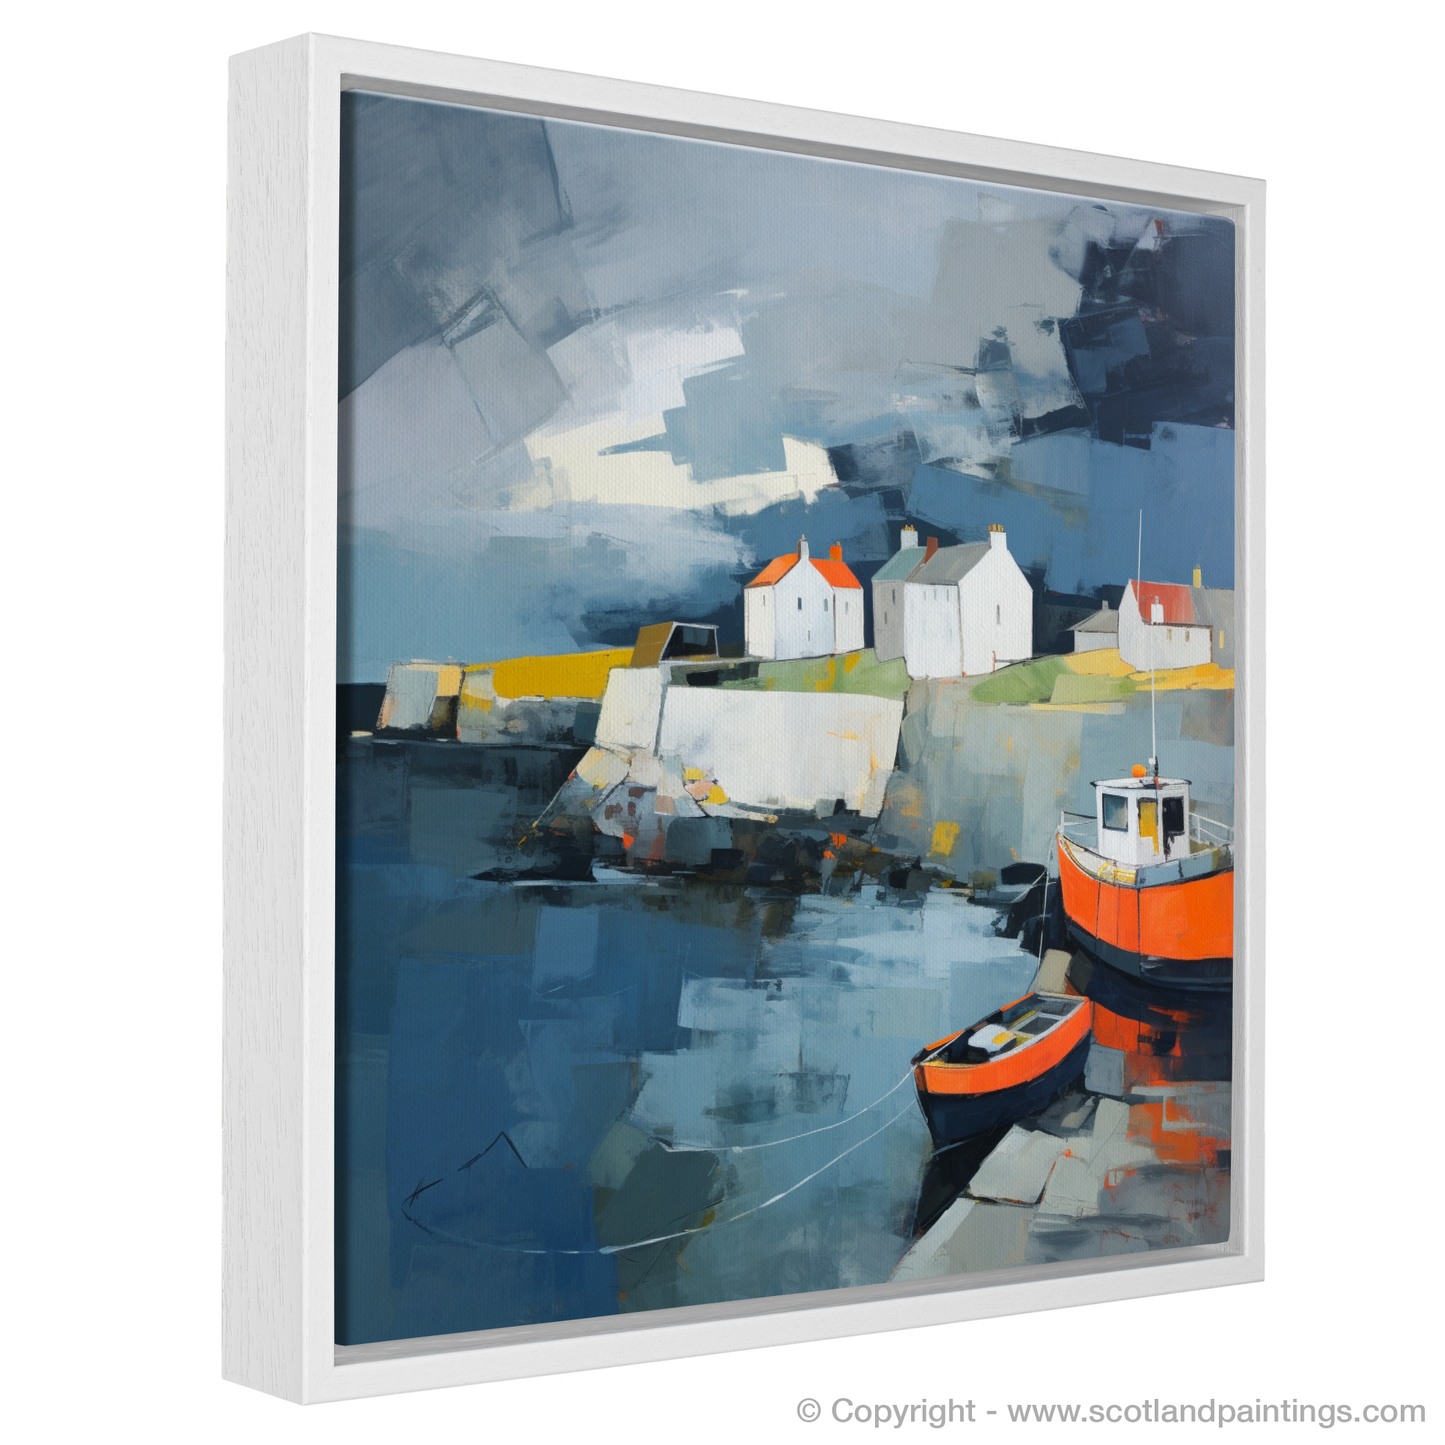 Storm Over Portsoy: A Dance of Wind and Water